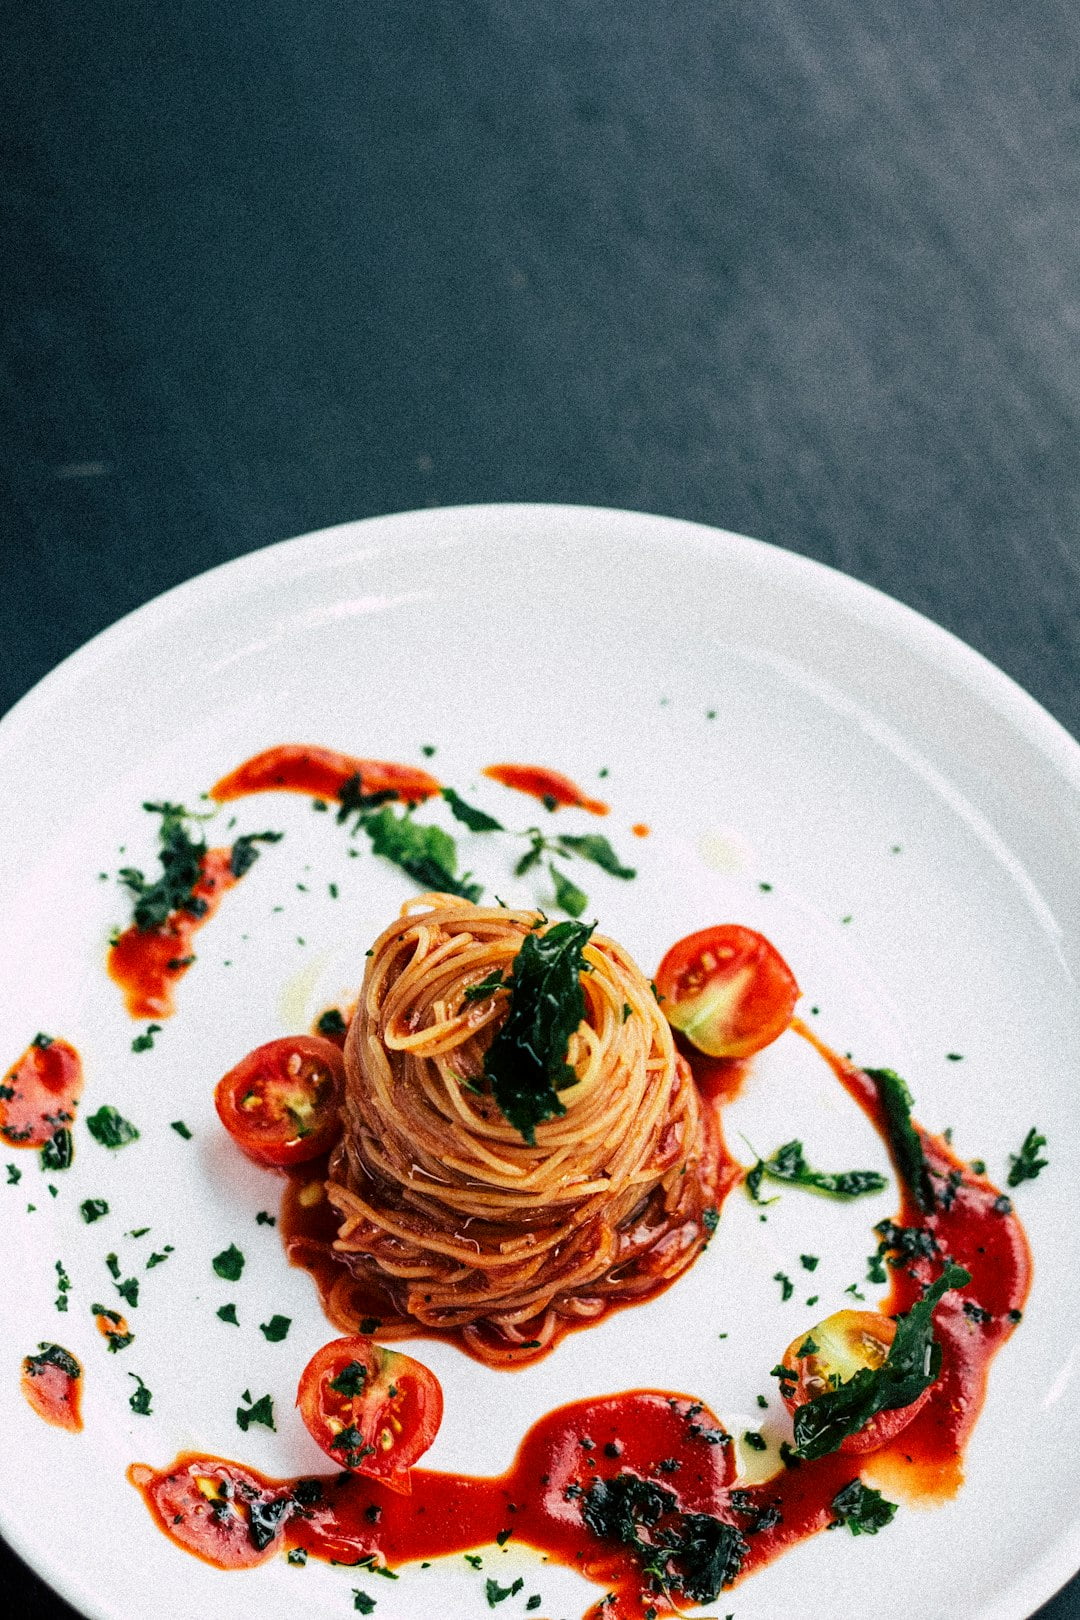 Beautifully arranged plate of spaghetti and tomatoes